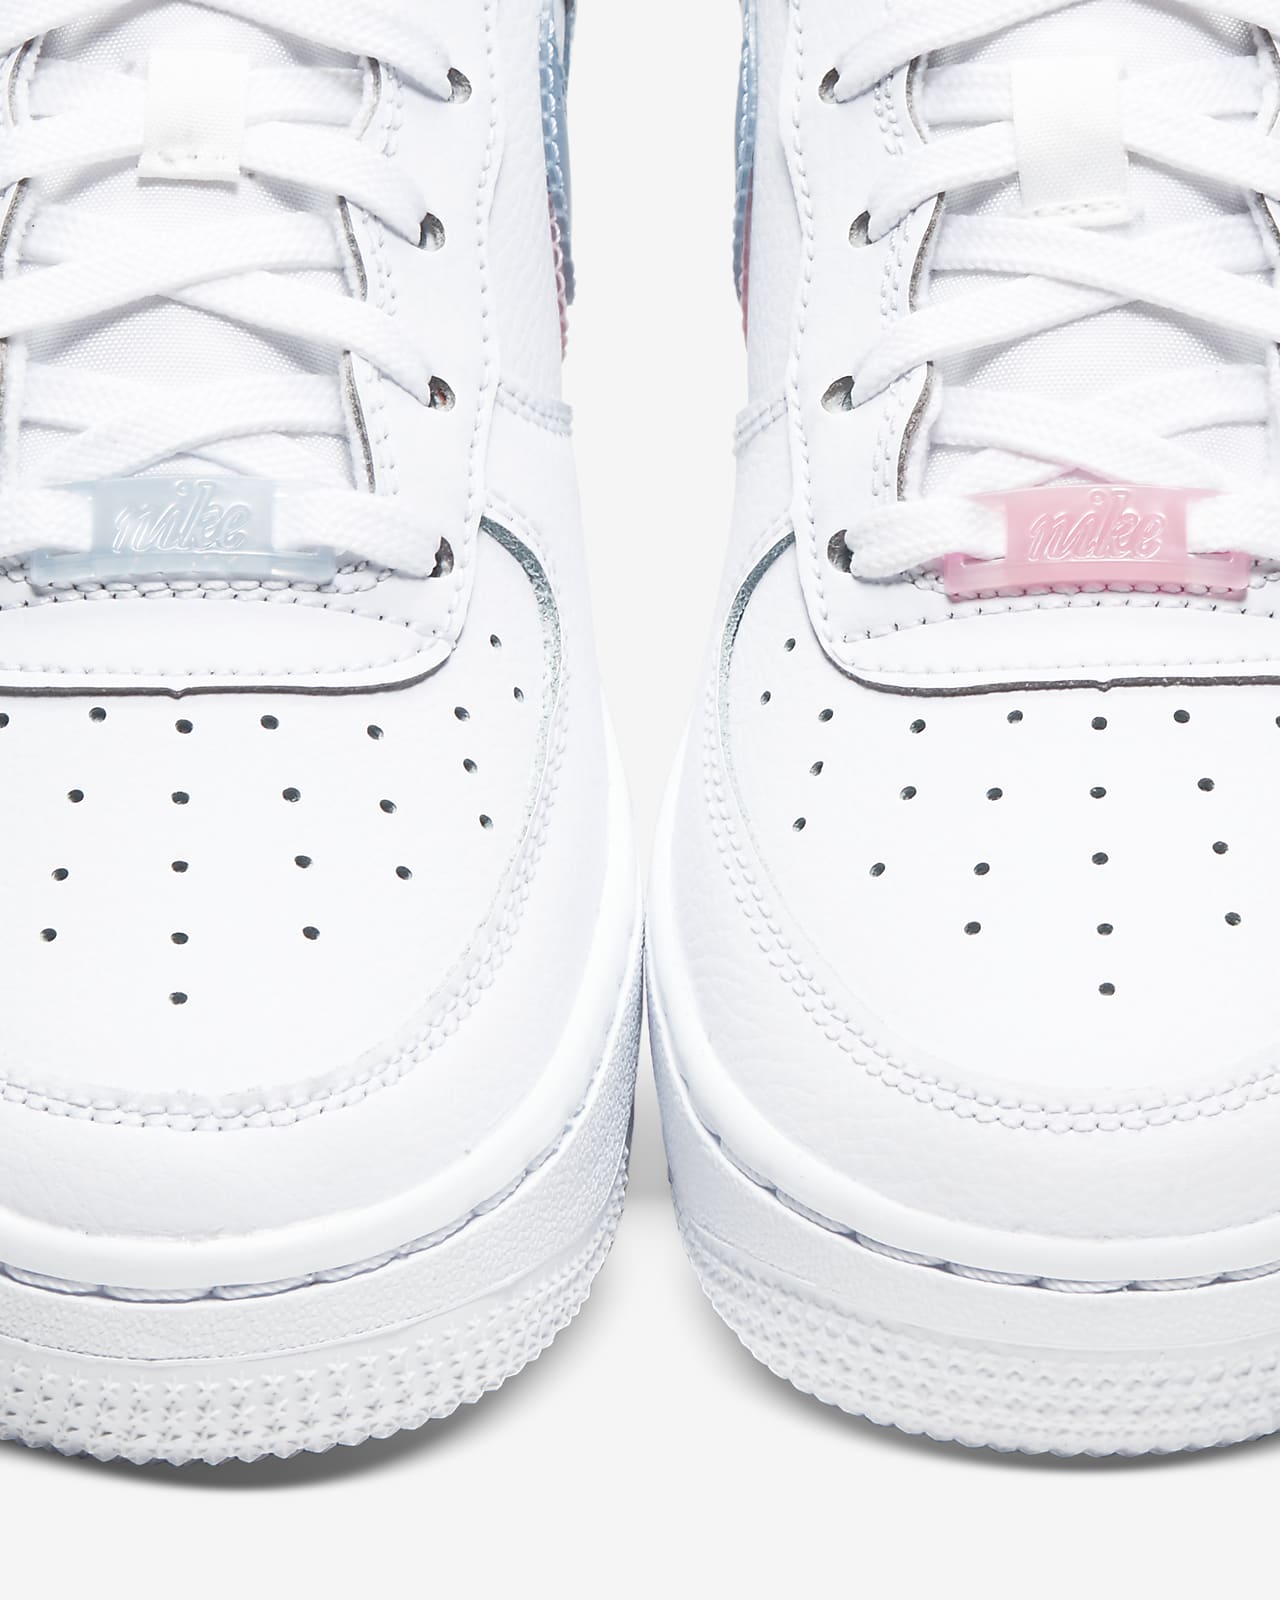 nike air force pink and blue